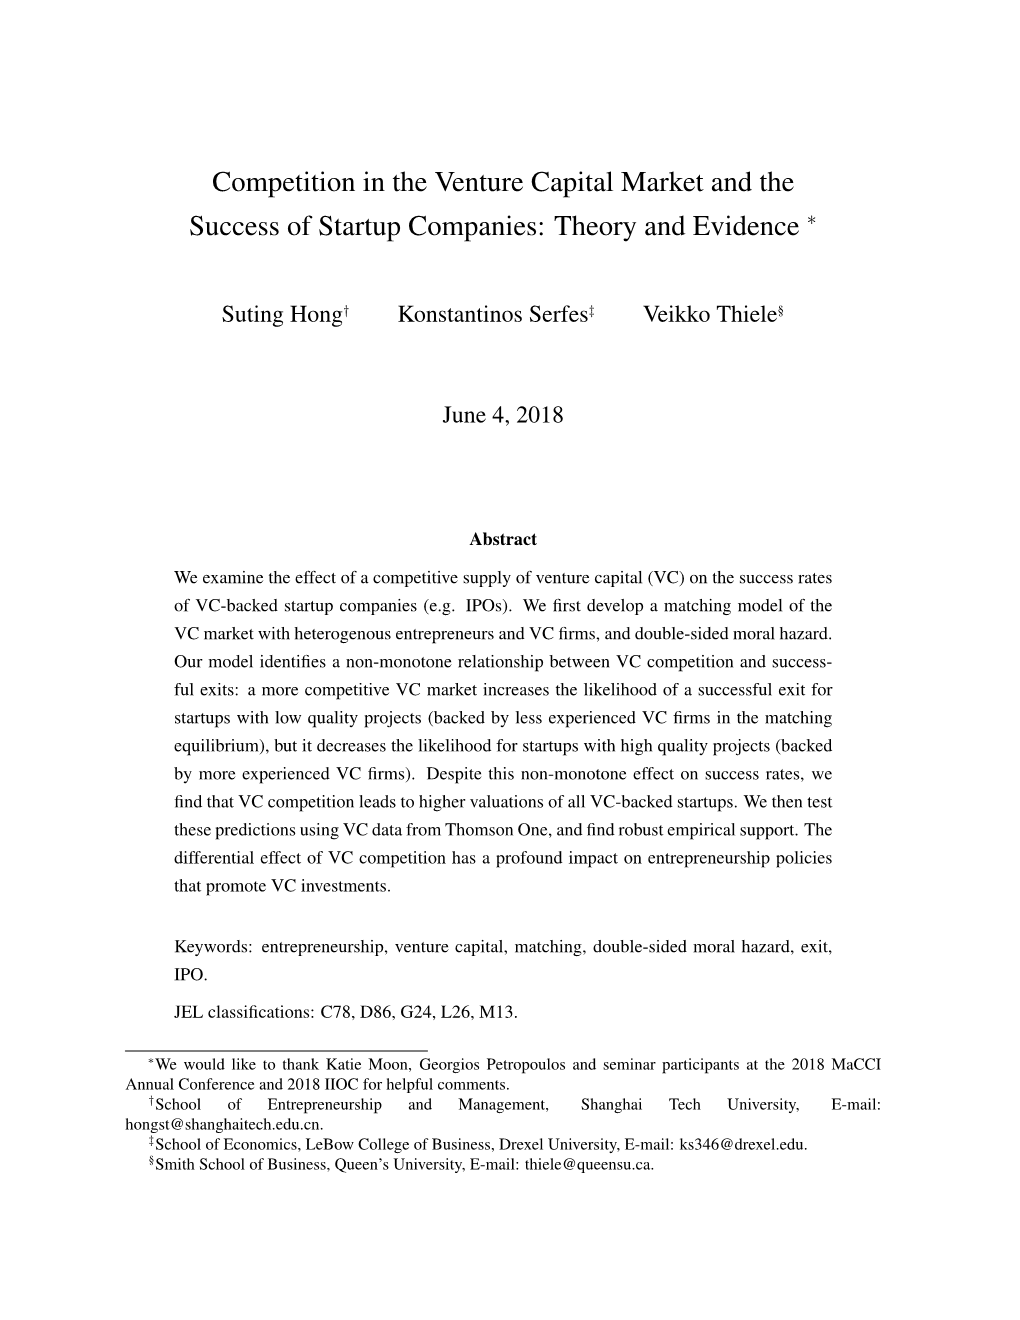 Competition in the Venture Capital Market and the Success of Startup Companies: Theory and Evidence ∗